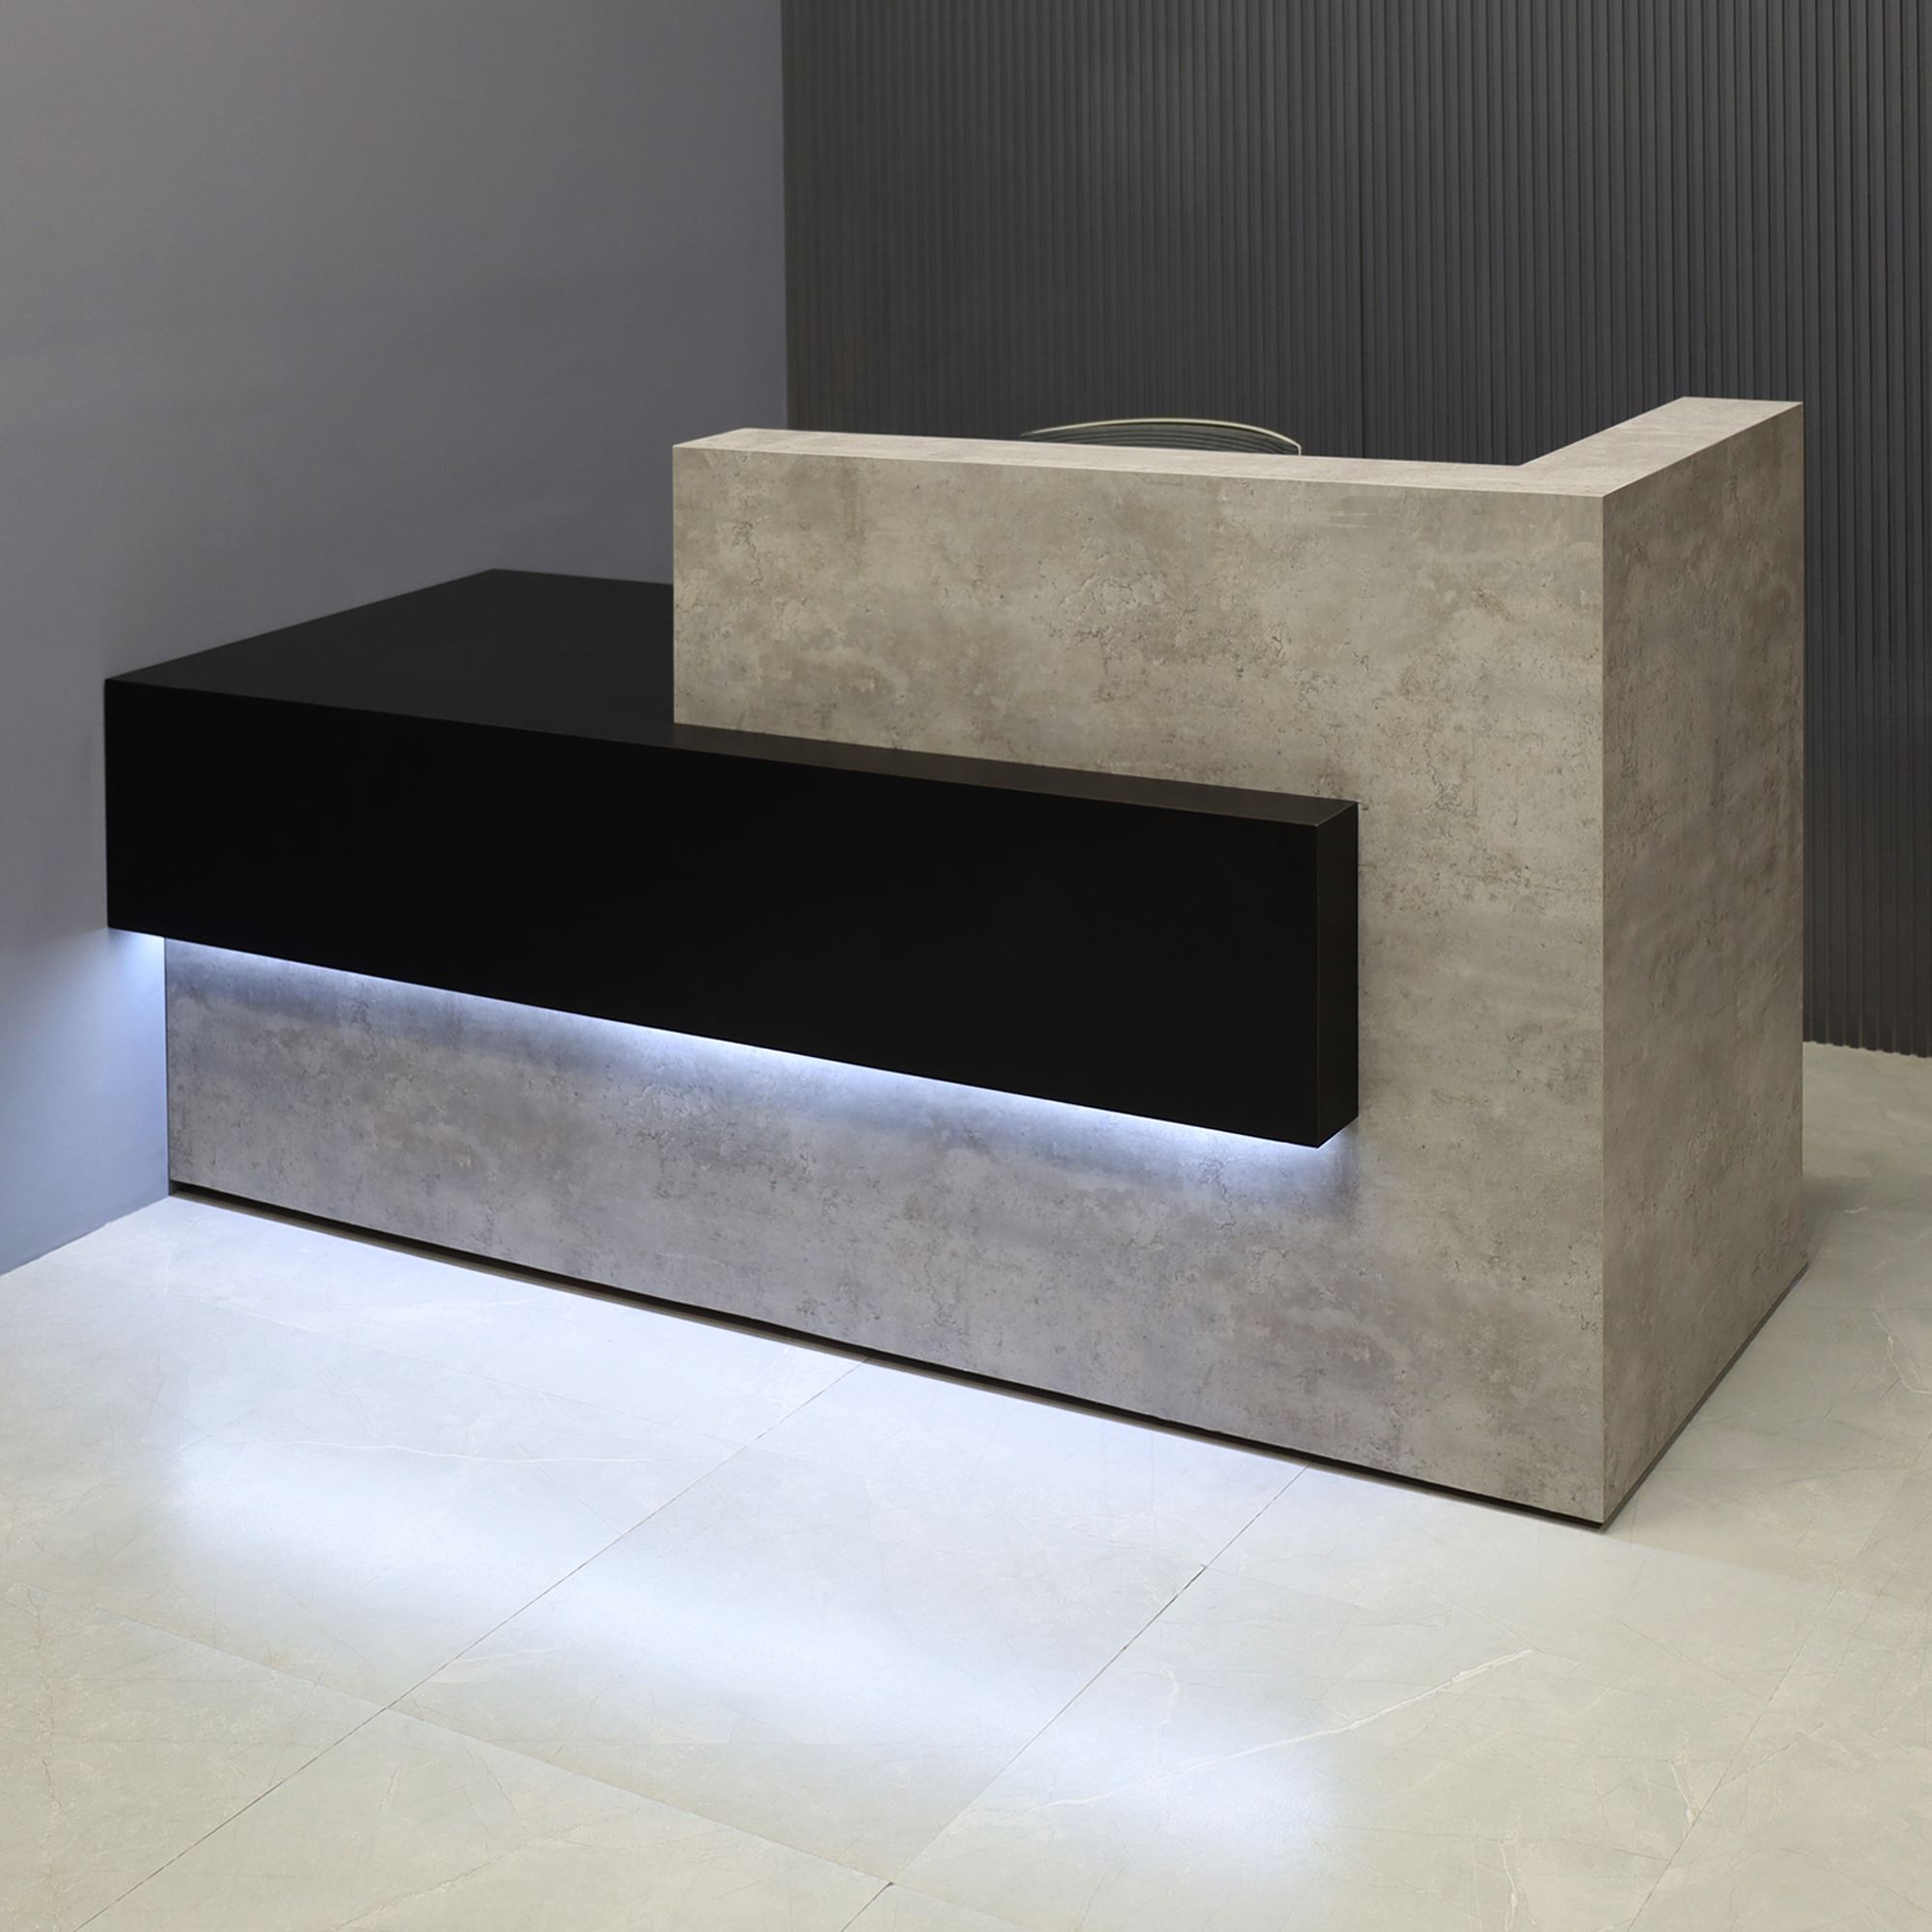 84-inch Atlanta Custom Reception Desk in industrial concrete laminate countertop & base, and black traceless laminate front accent & workspace, with white LED, shown here.